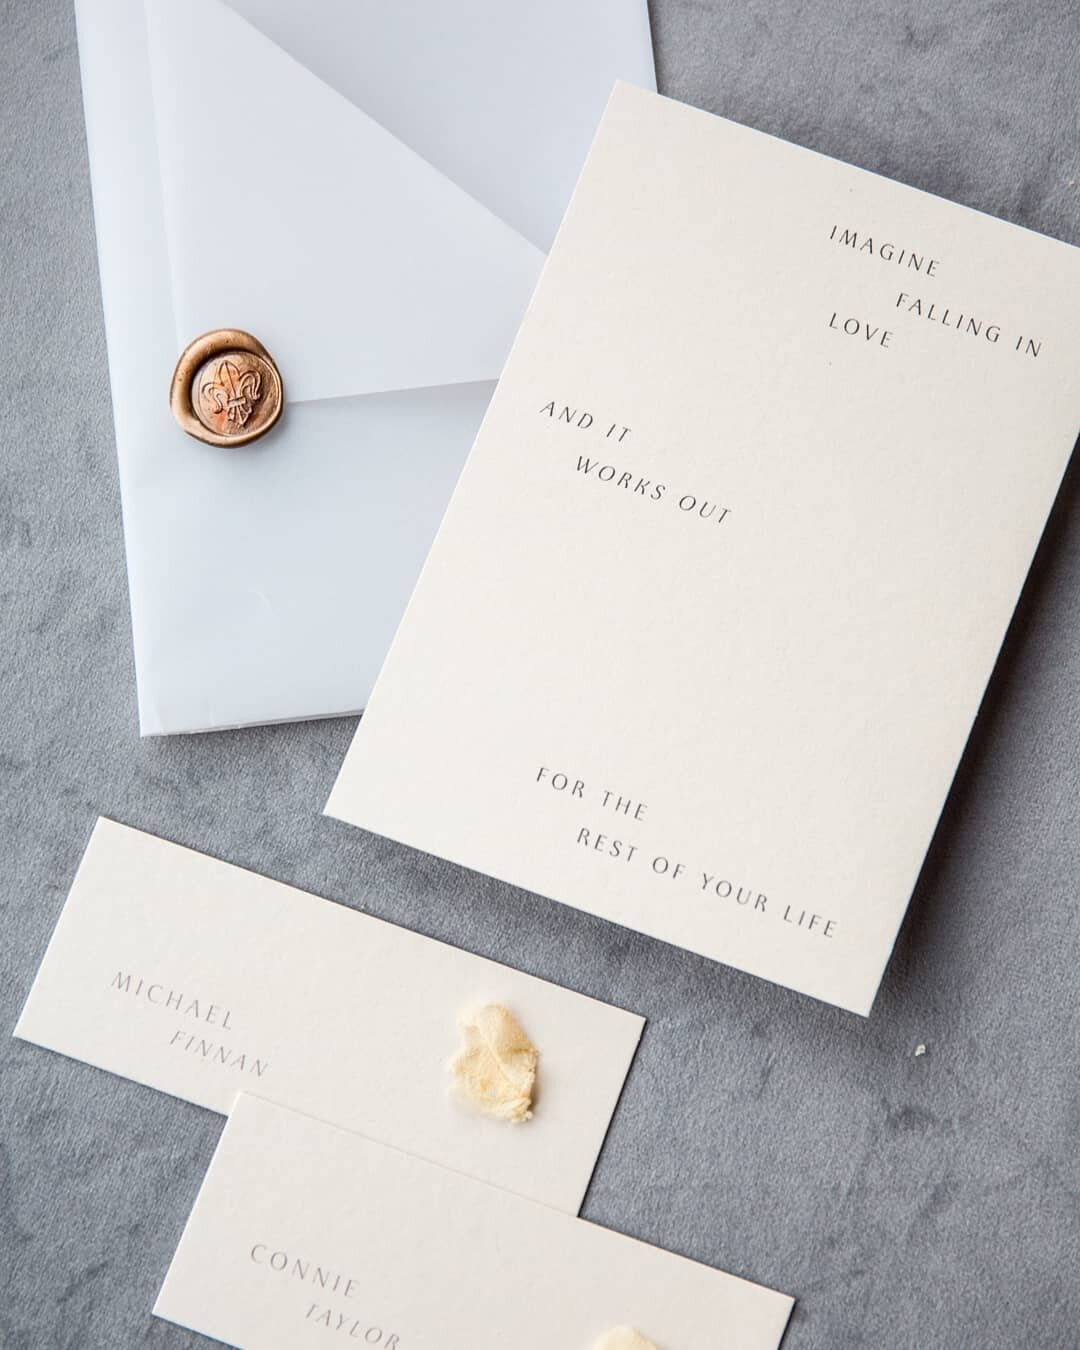 Beauty in simplicity... Little love notes and type placecards for a super slick couple.

Have a good weekend friends

#loveletters #stationerydesign #minimalwedding #moderncalligraphy #modernwedding #stationerydesign #vellumwrap #vellum #stationeryde